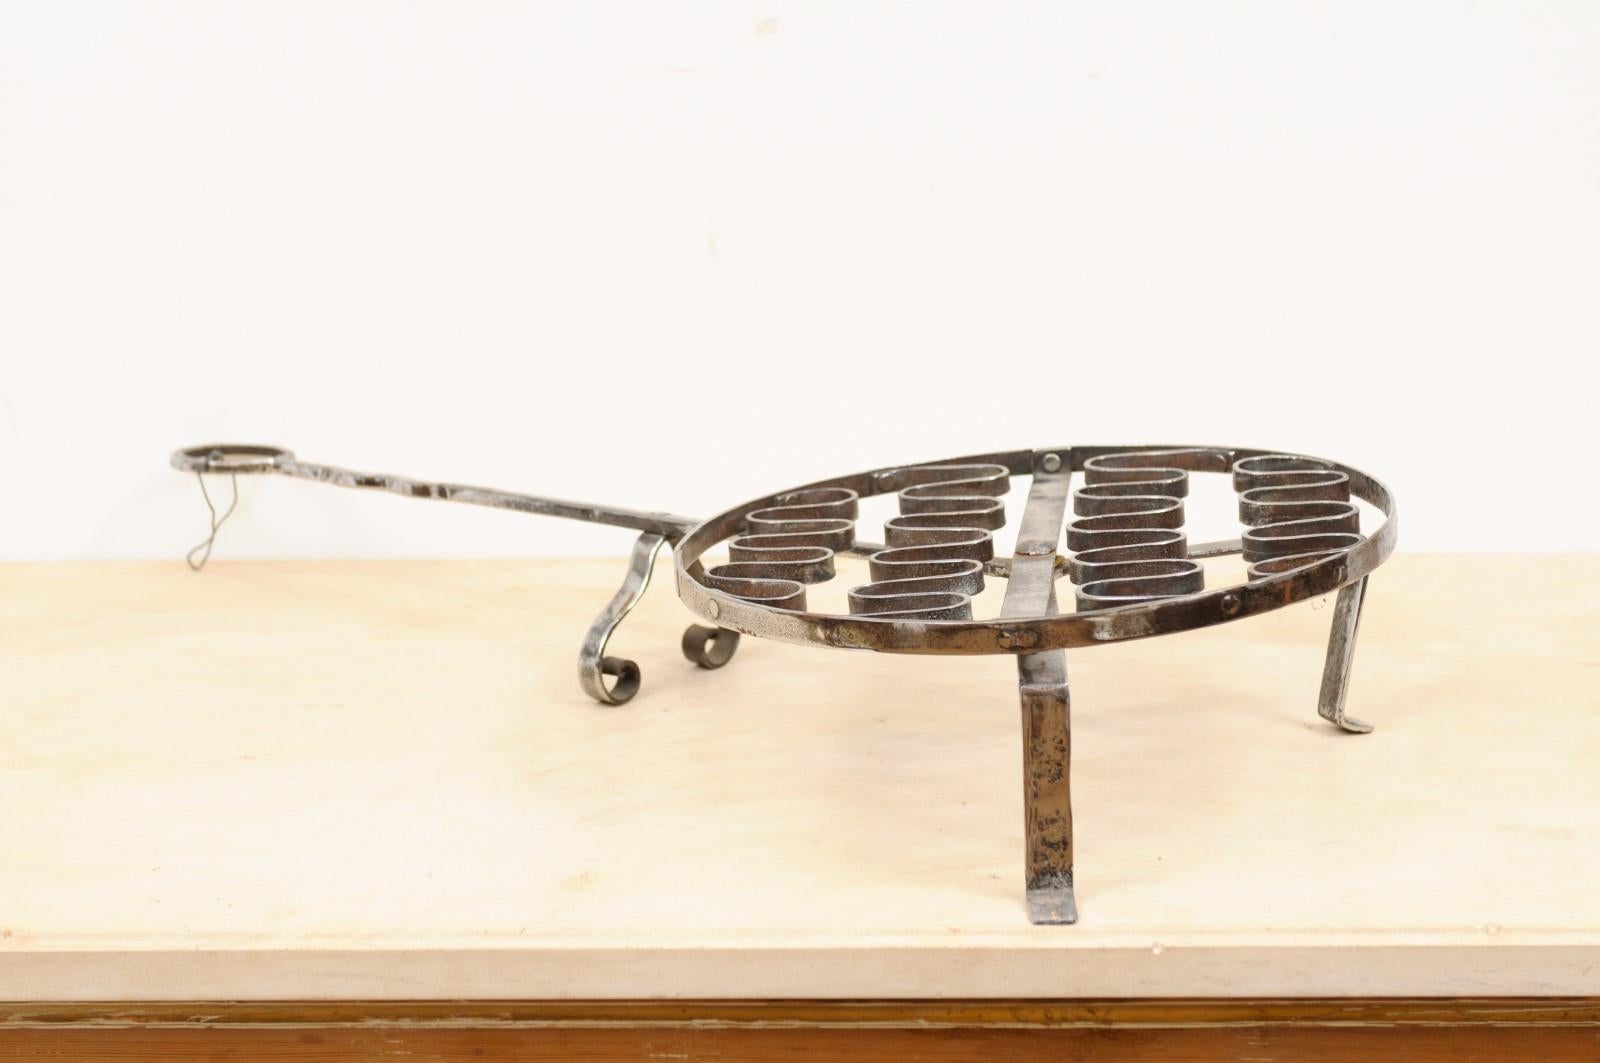 A French iron grill from the 19th century, with petite feet and long handle. Created in France during the 19th century, this iron grill was used as a tool in a fireplace. Featuring a circular body resting on petite feet, the grill showcases a long